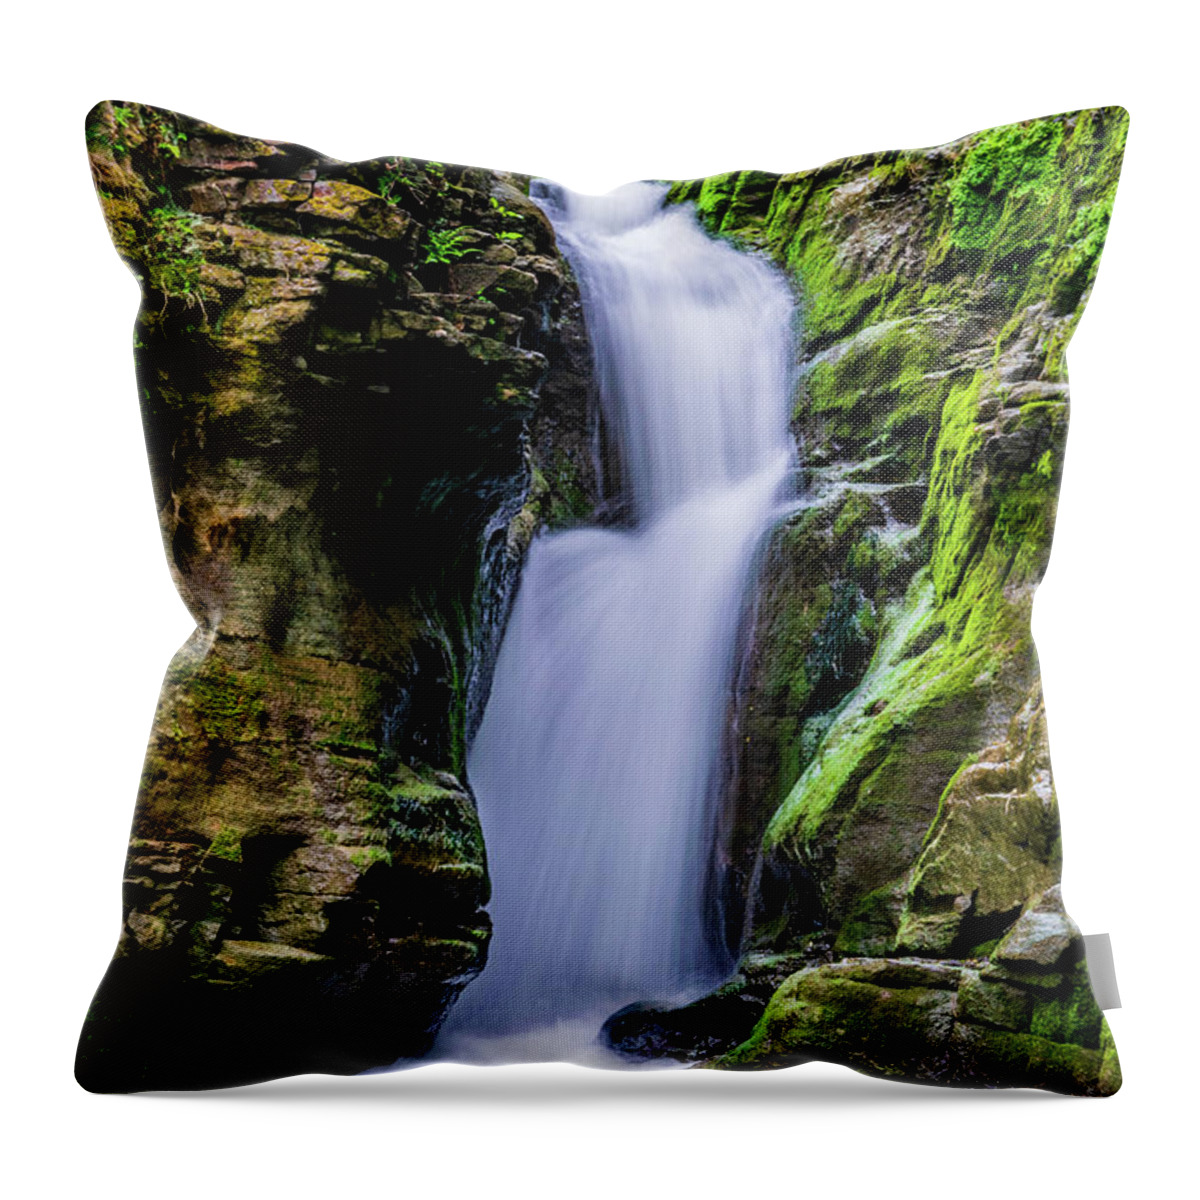 Waterfall Throw Pillow featuring the photograph Red Rock Falls by Flowstate Photography